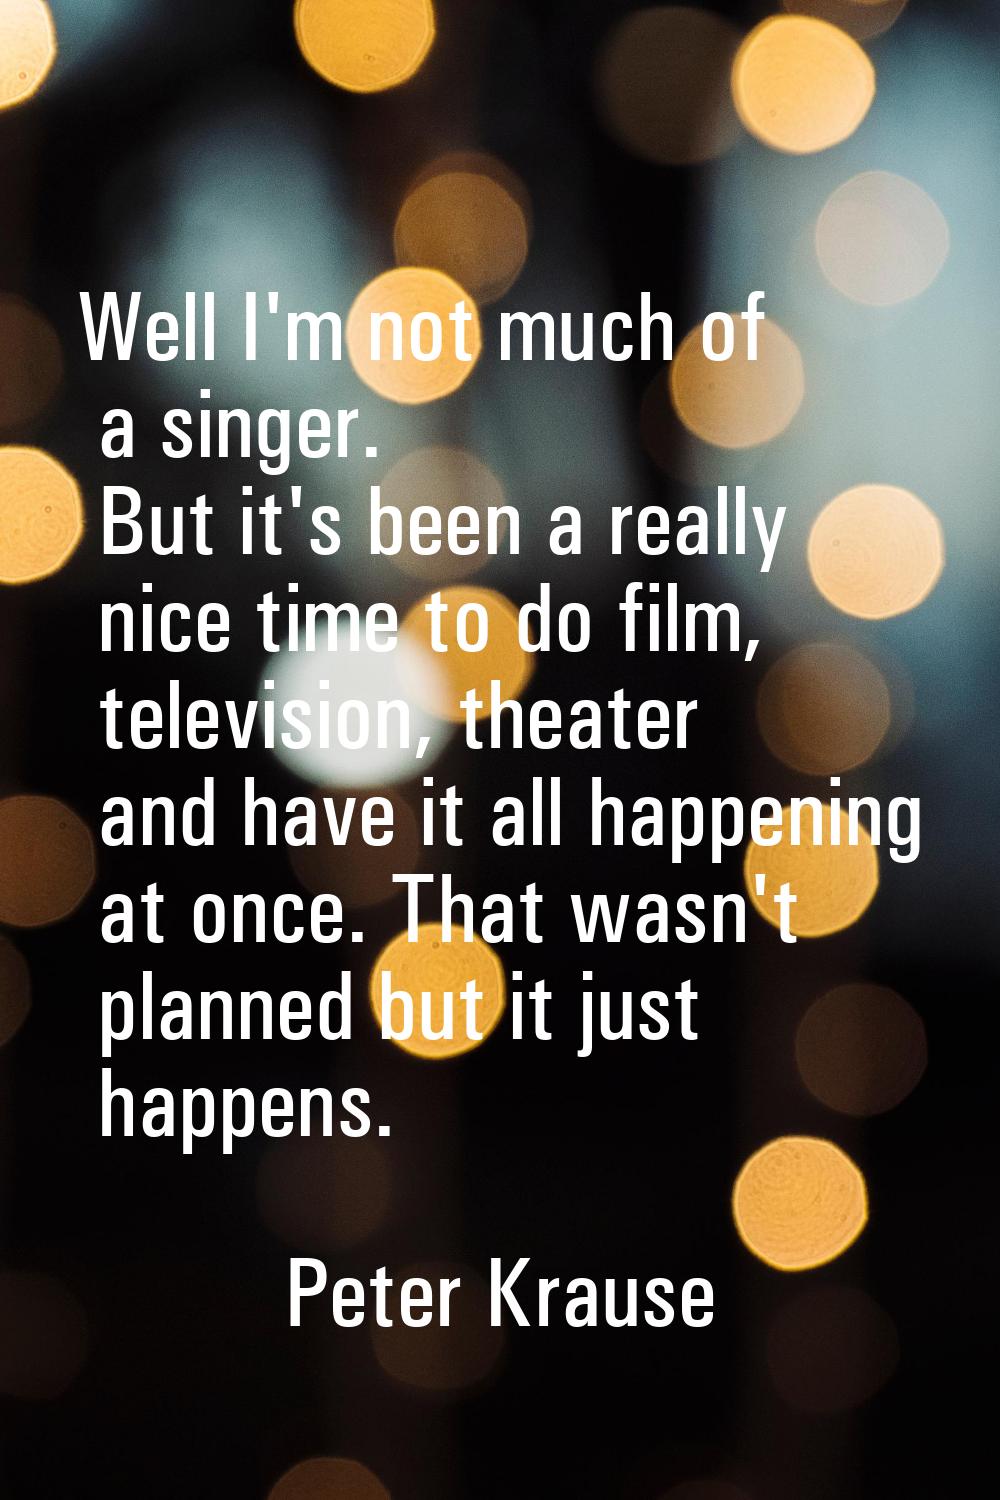 Well I'm not much of a singer. But it's been a really nice time to do film, television, theater and